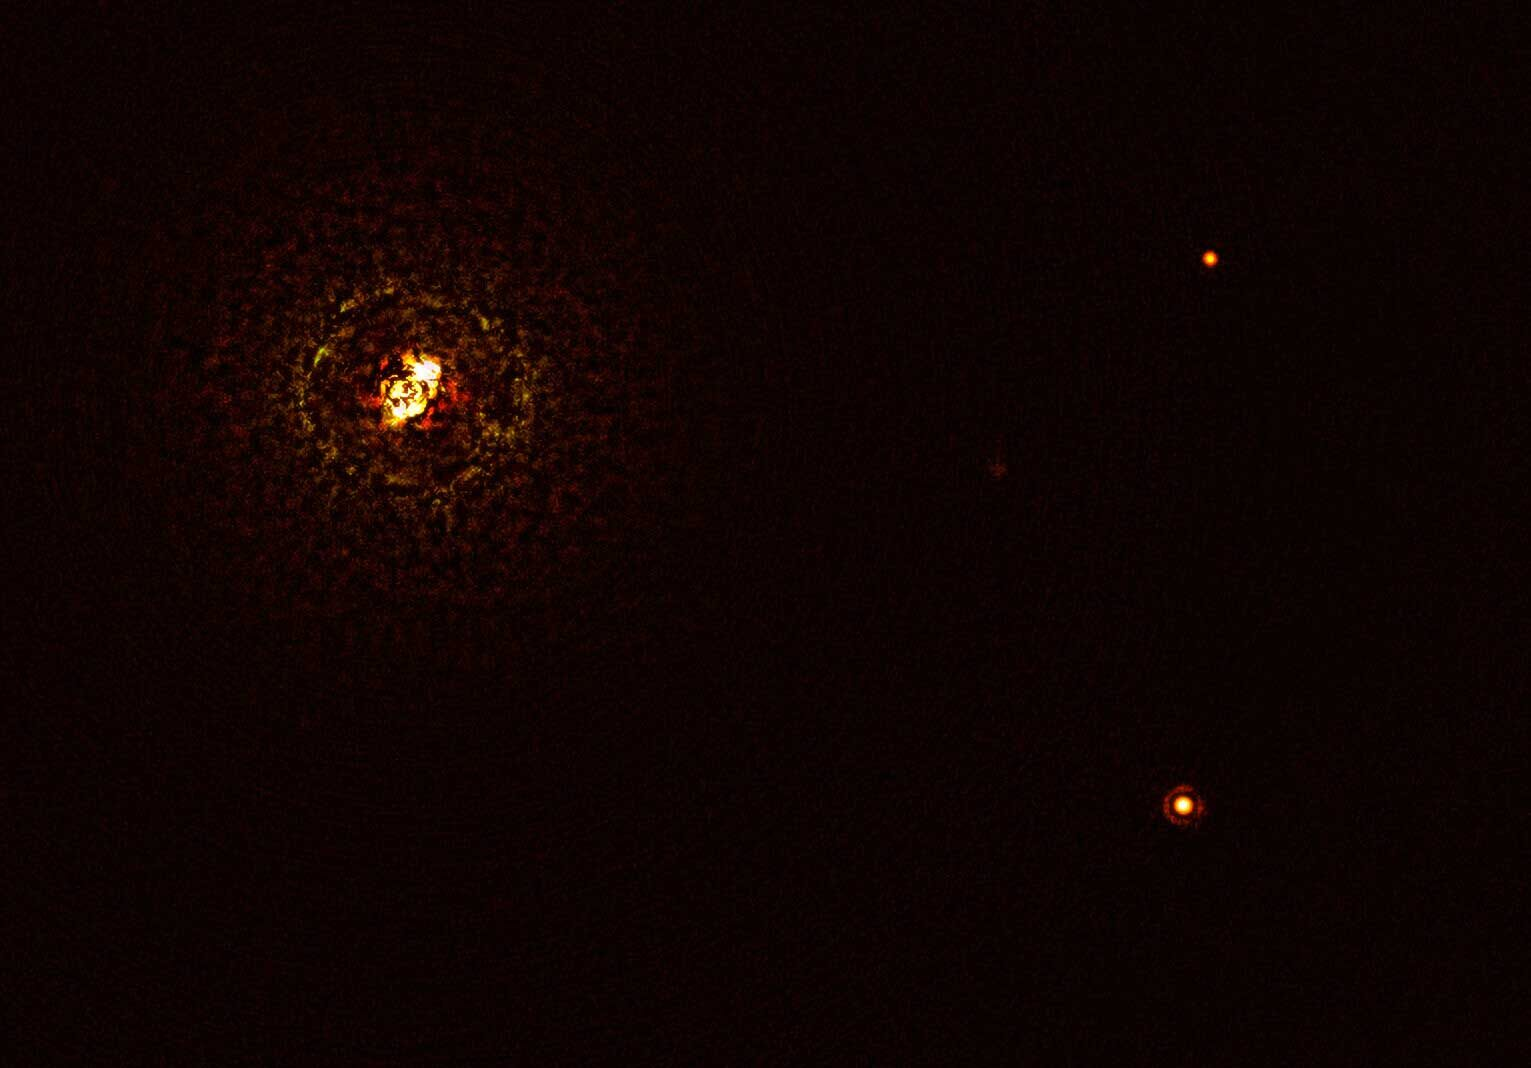 This image shows the most massive planet-hosting star pair to date, b Centauri, and its giant planet b Centauri b